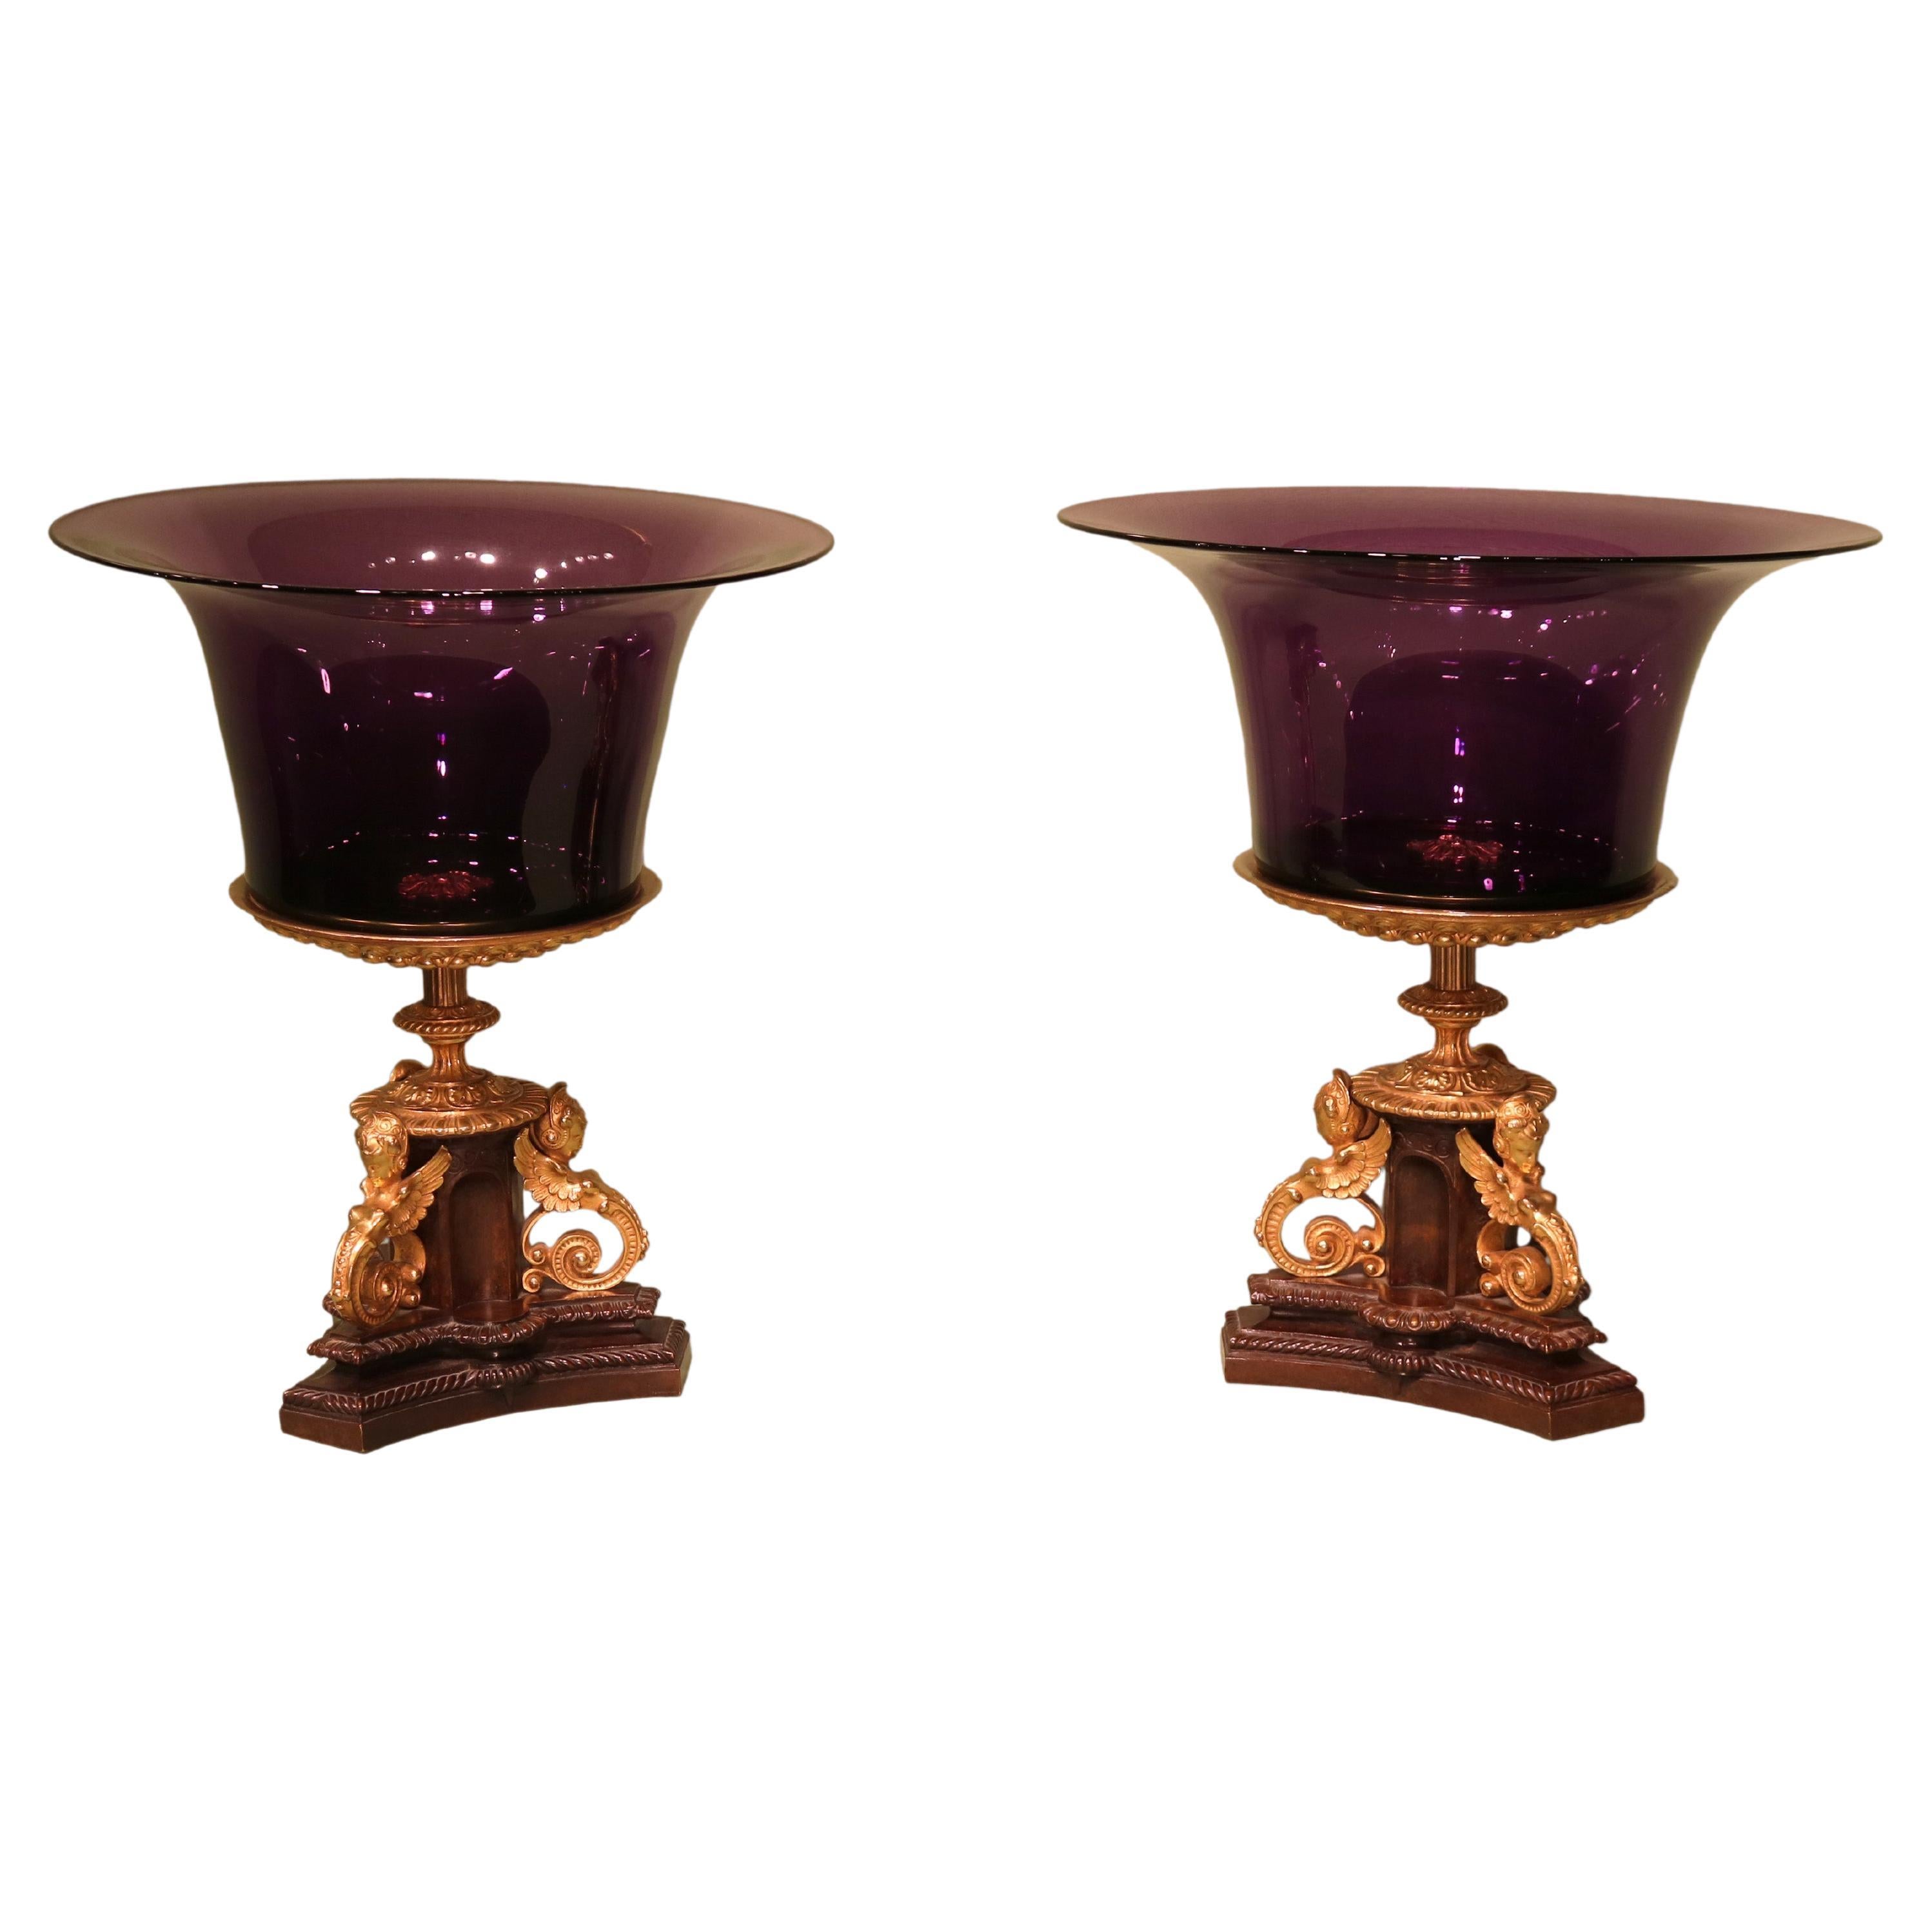 Antique Pair of Bronze and Ormolu Tazzas with Amethyst Glass Bowls For Sale